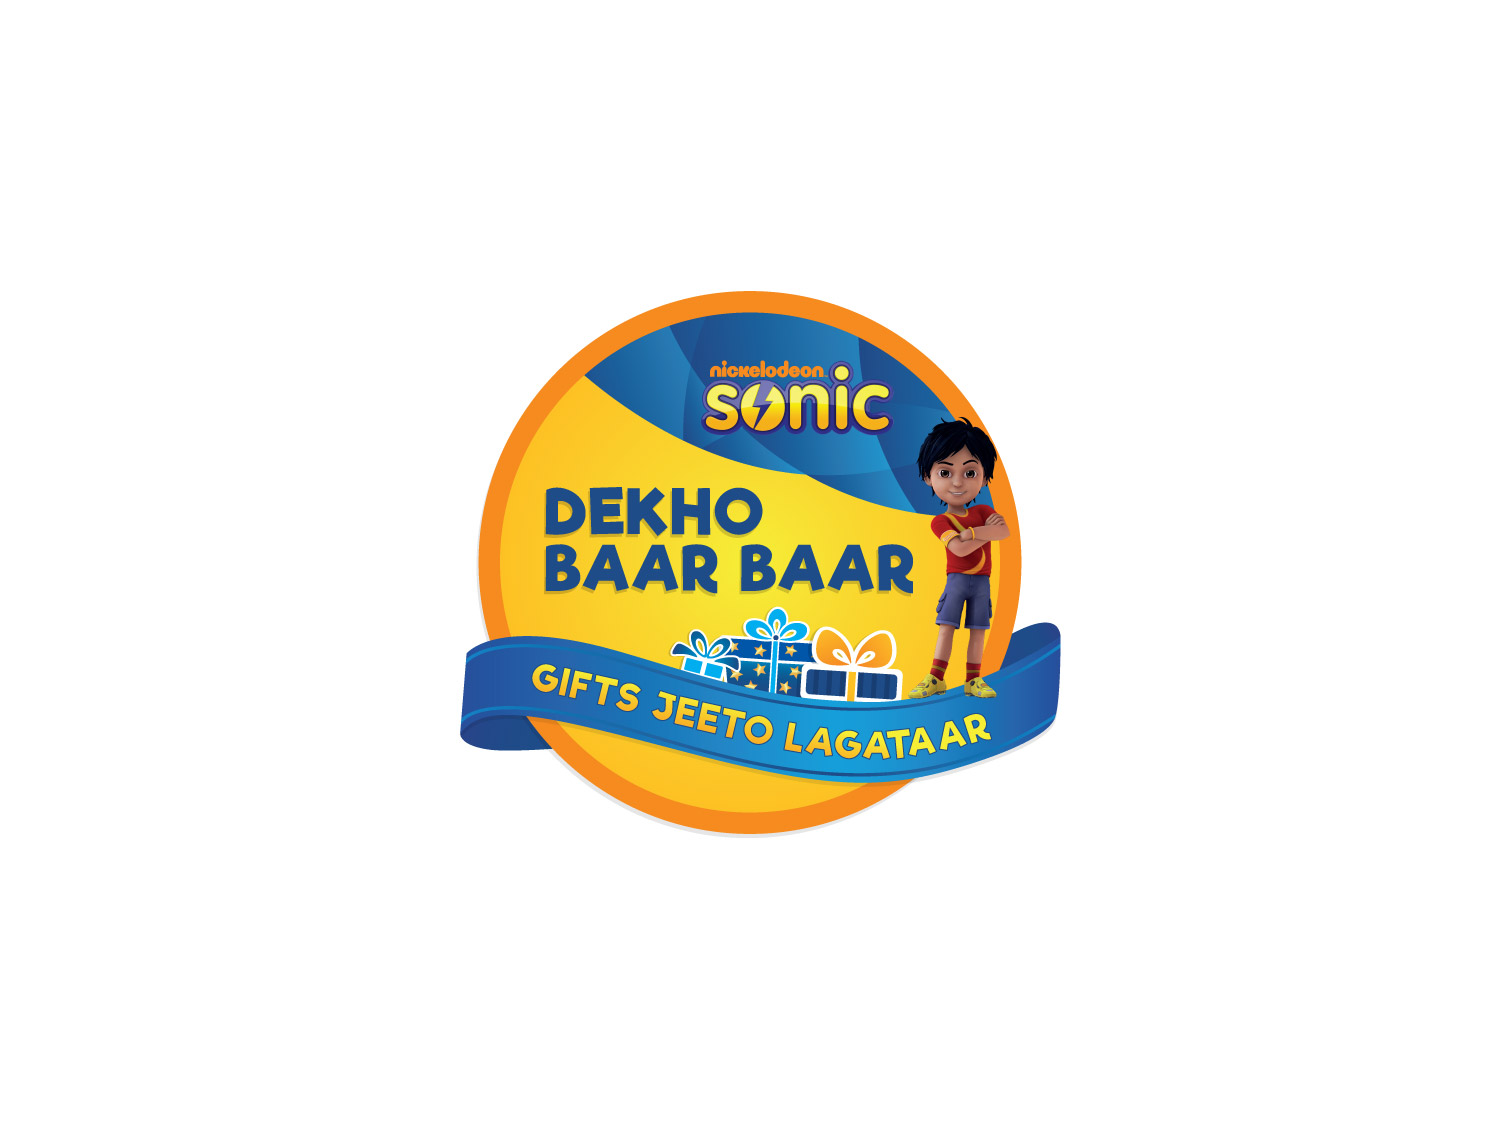 Sonic approved logo